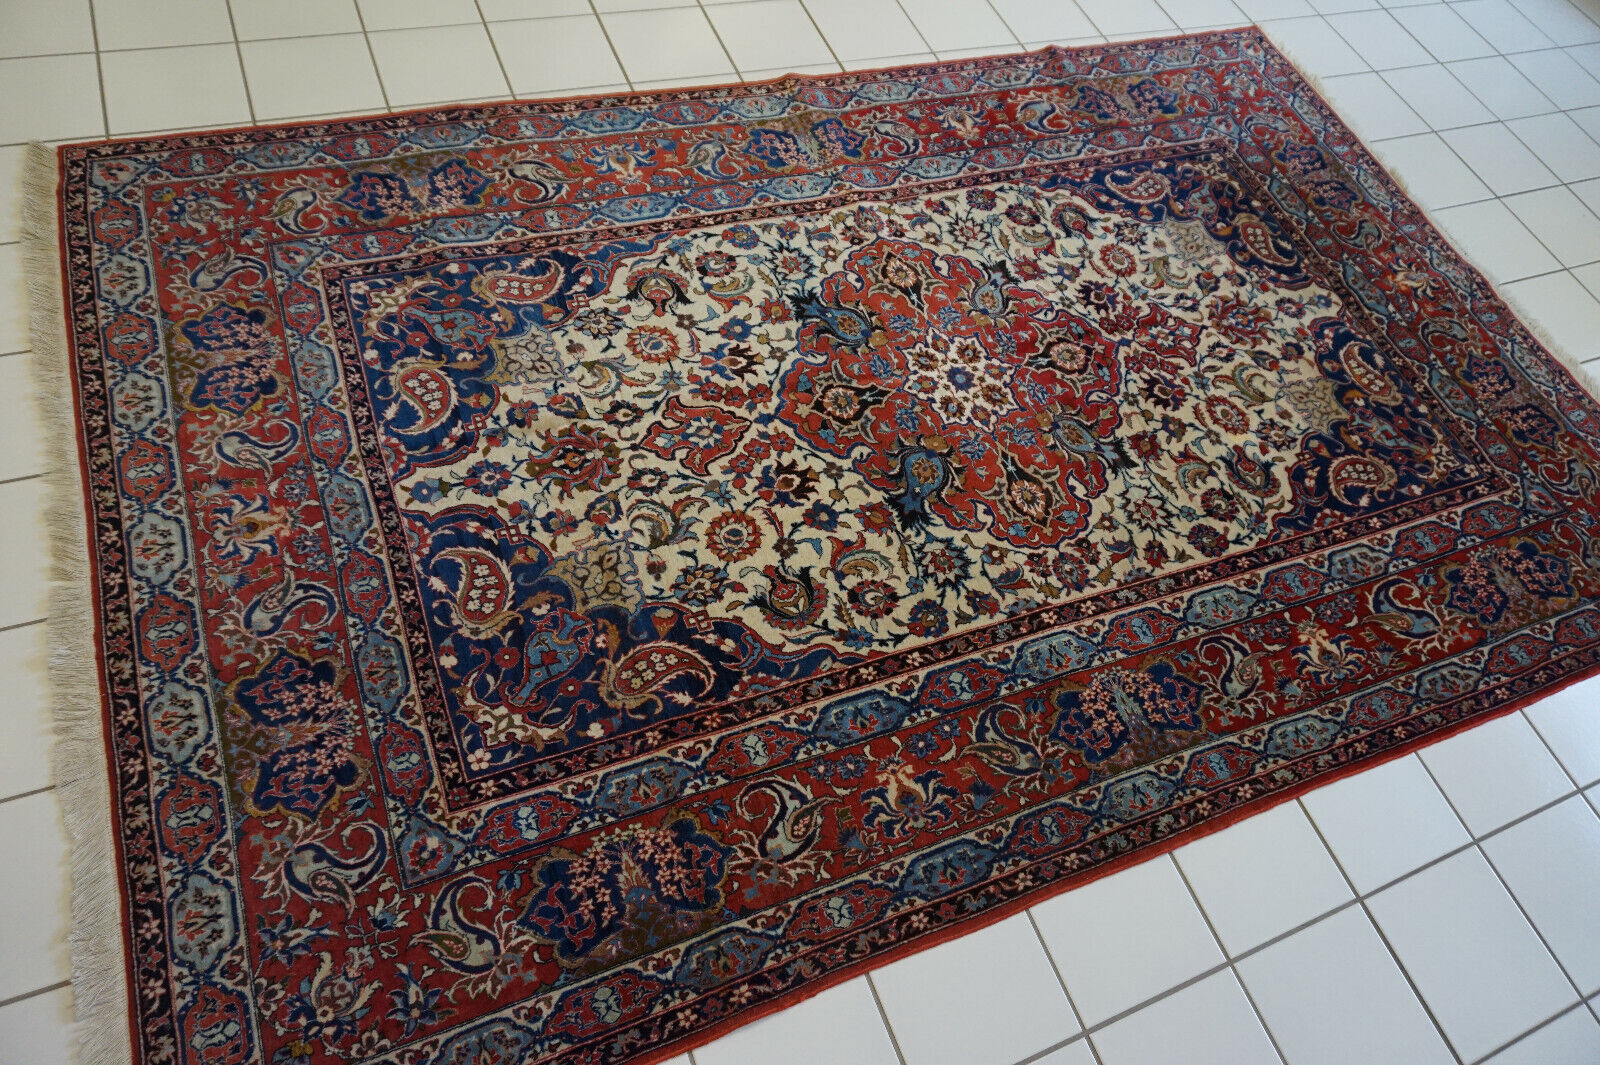 Angled shot of the Handmade Antique Persian Style Isfahan Rug complementing furniture